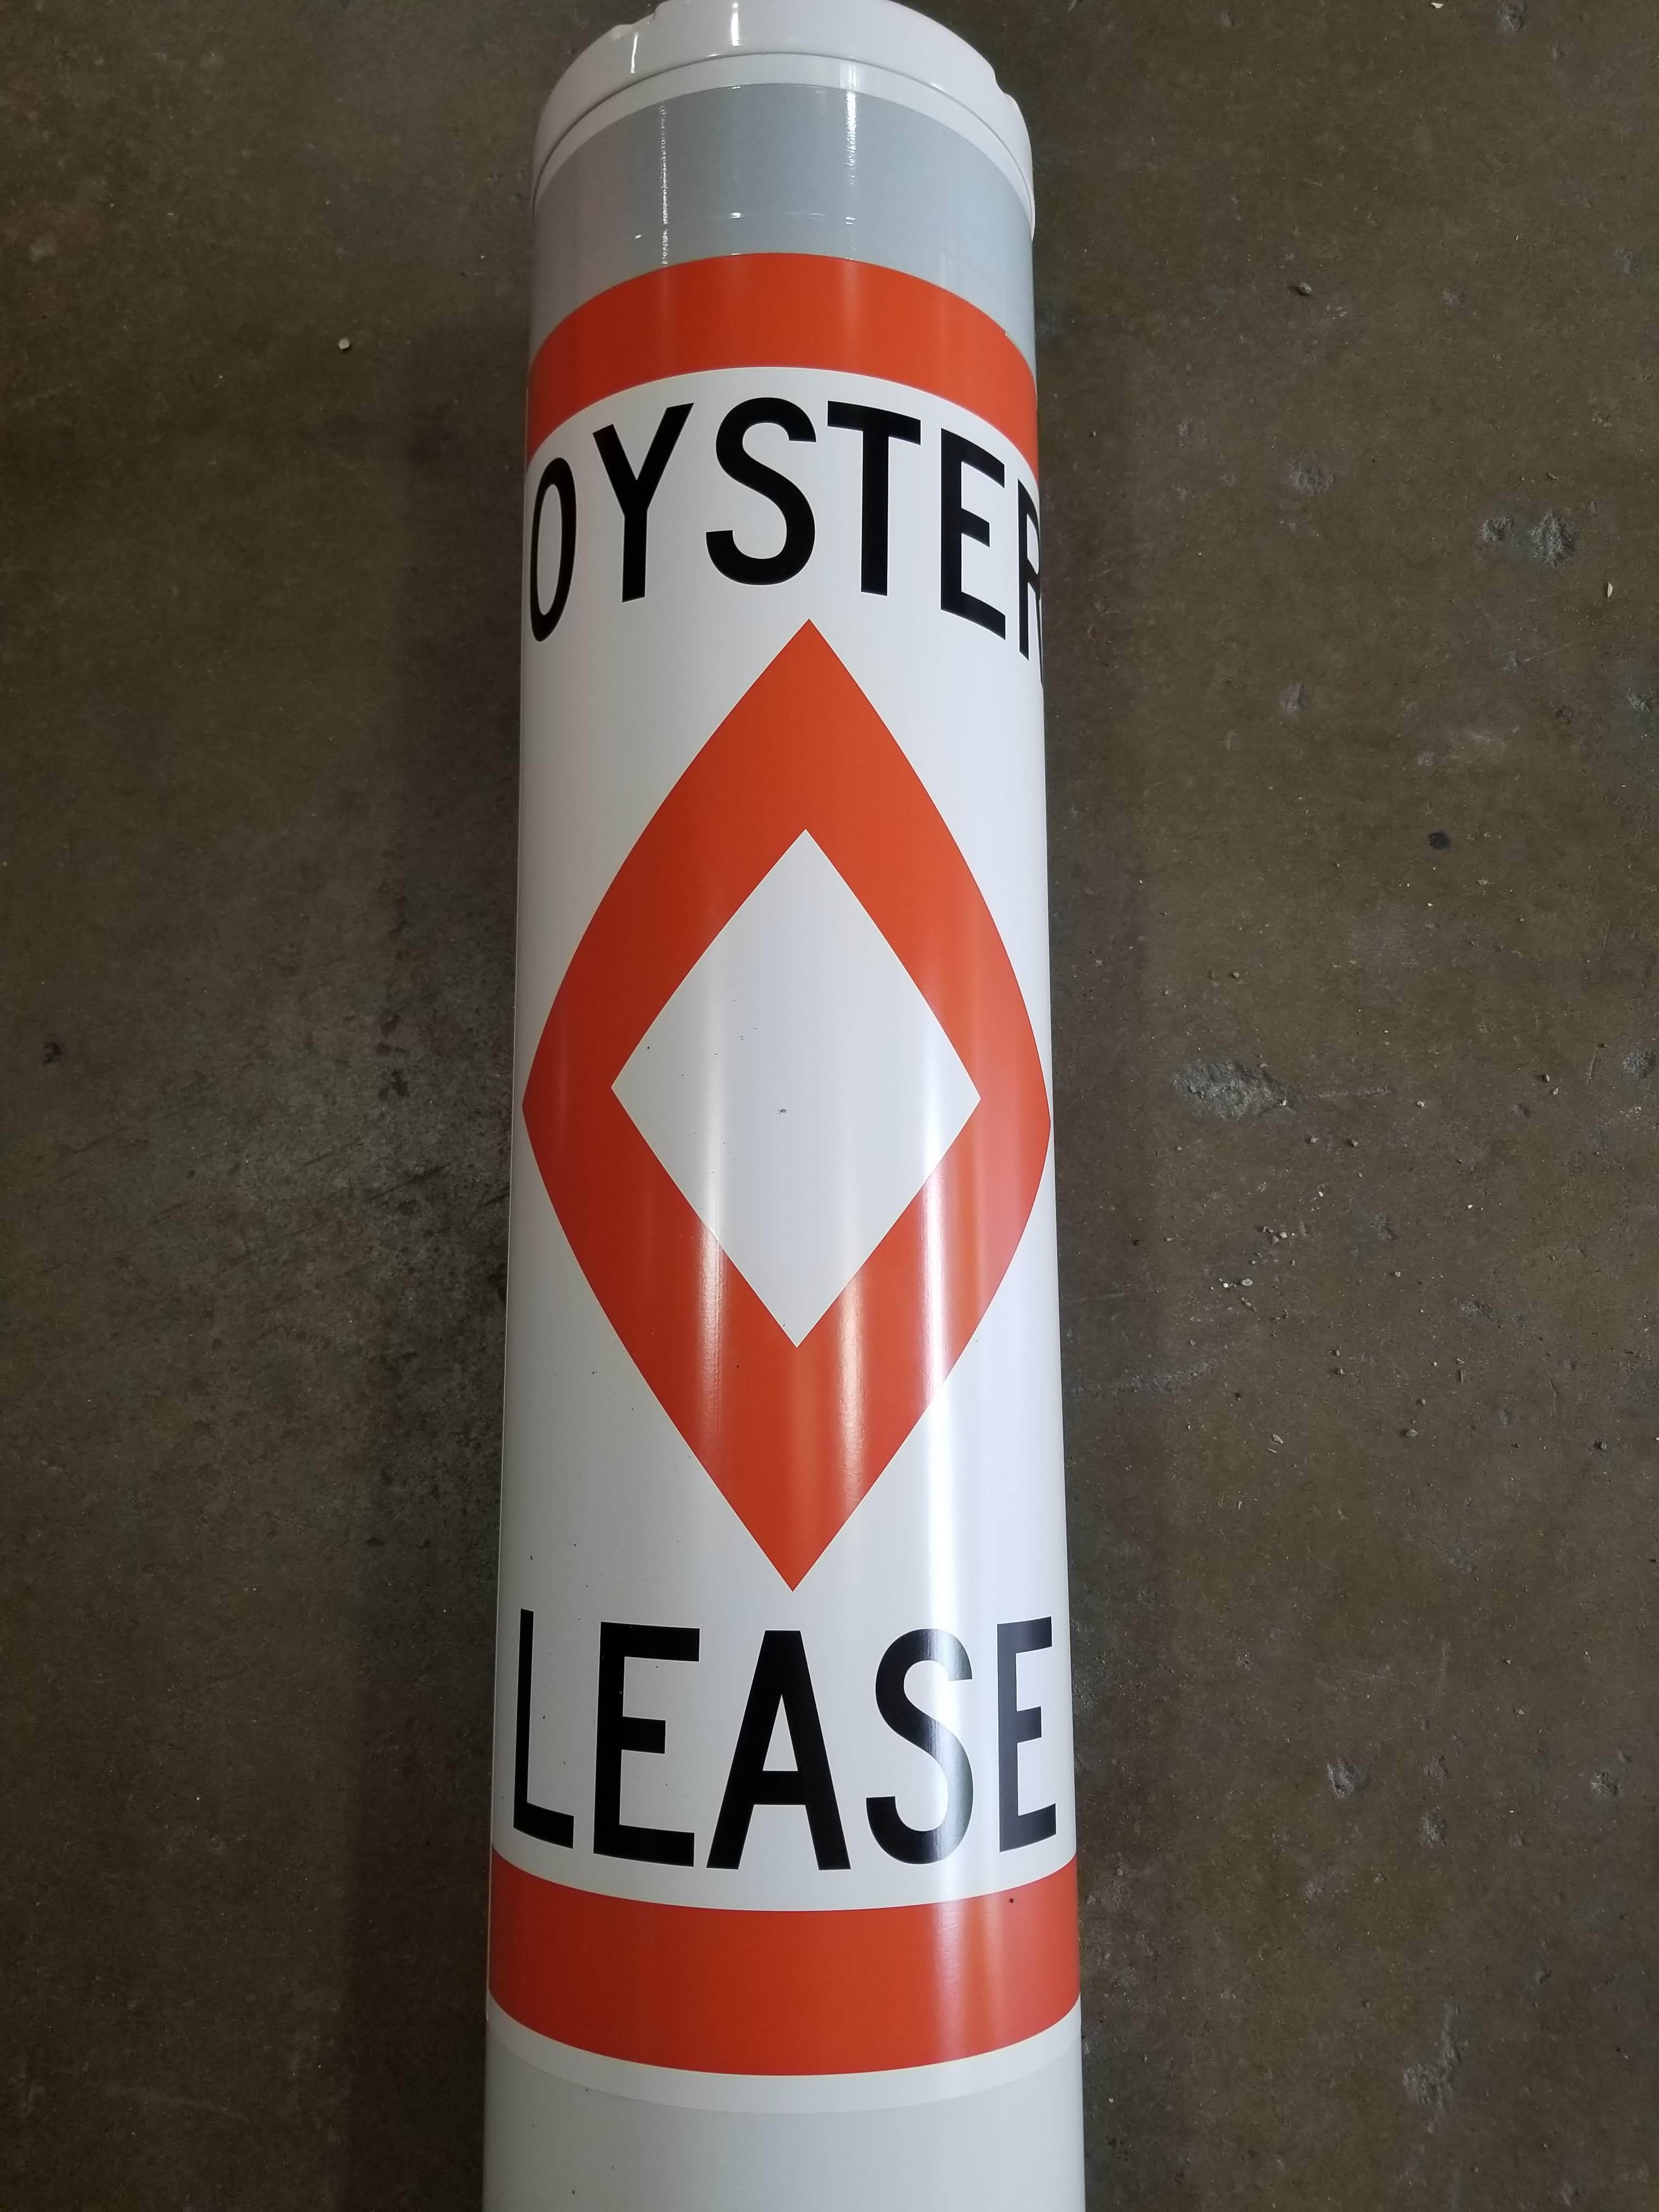 Oyster Lease Buoy Close Up